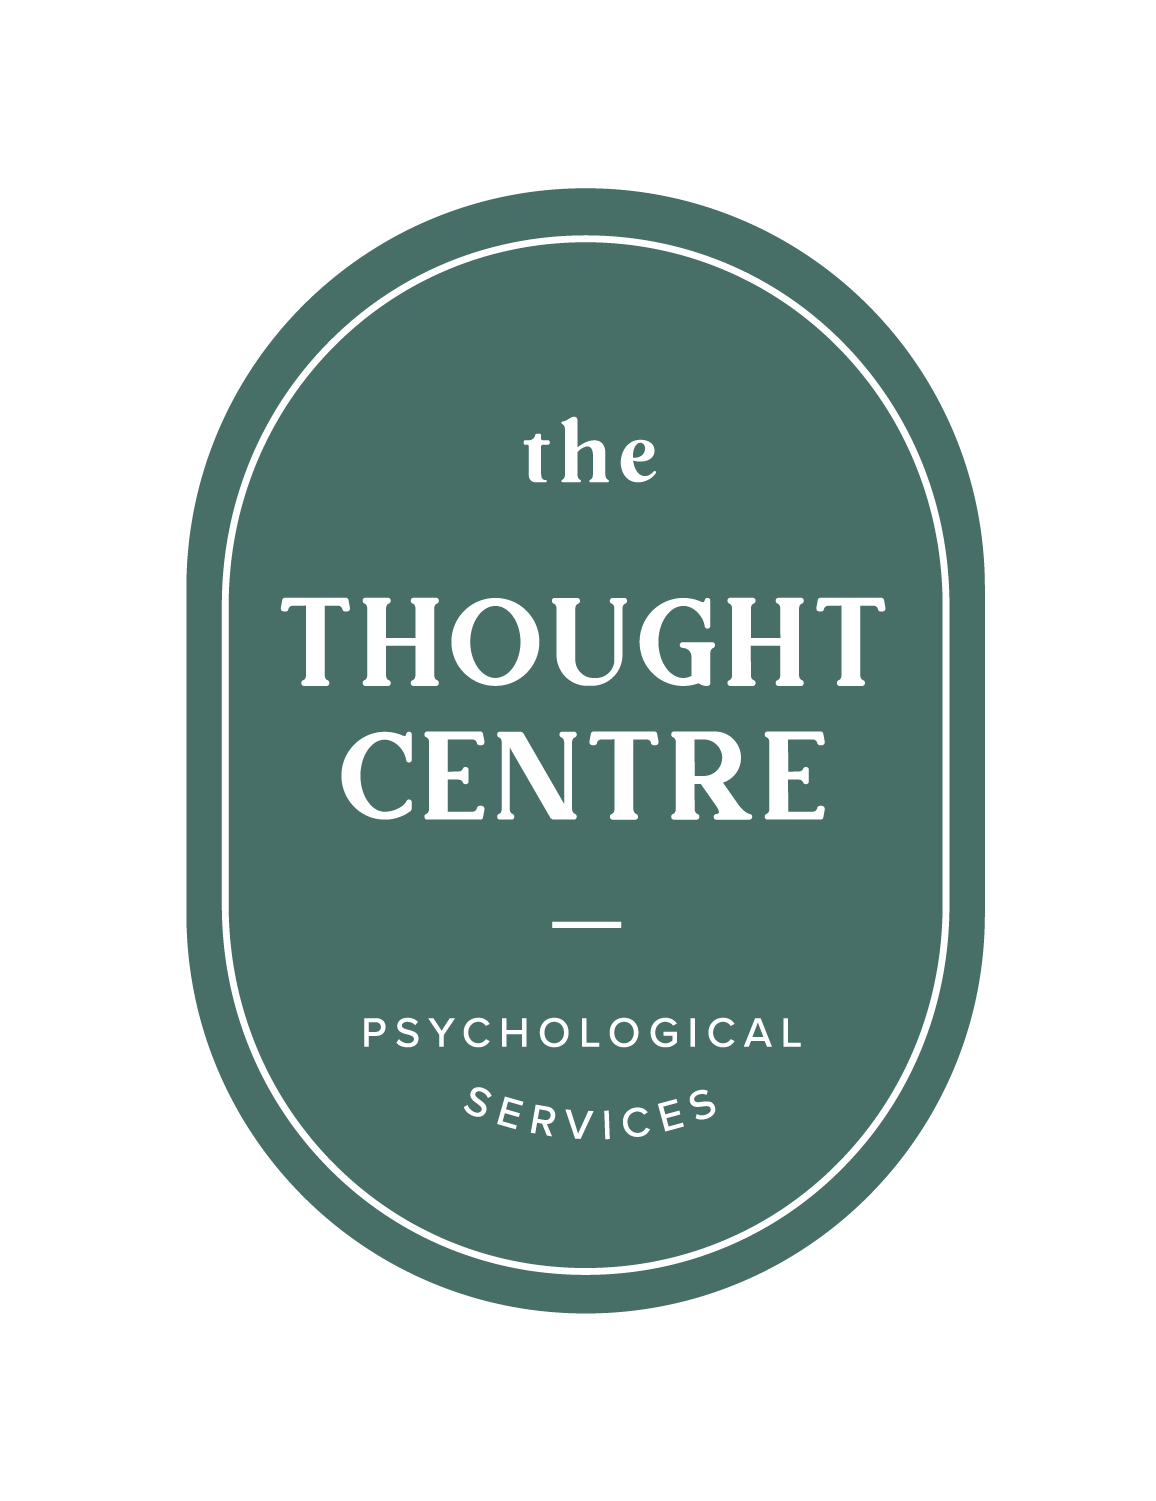 The Thought Centre